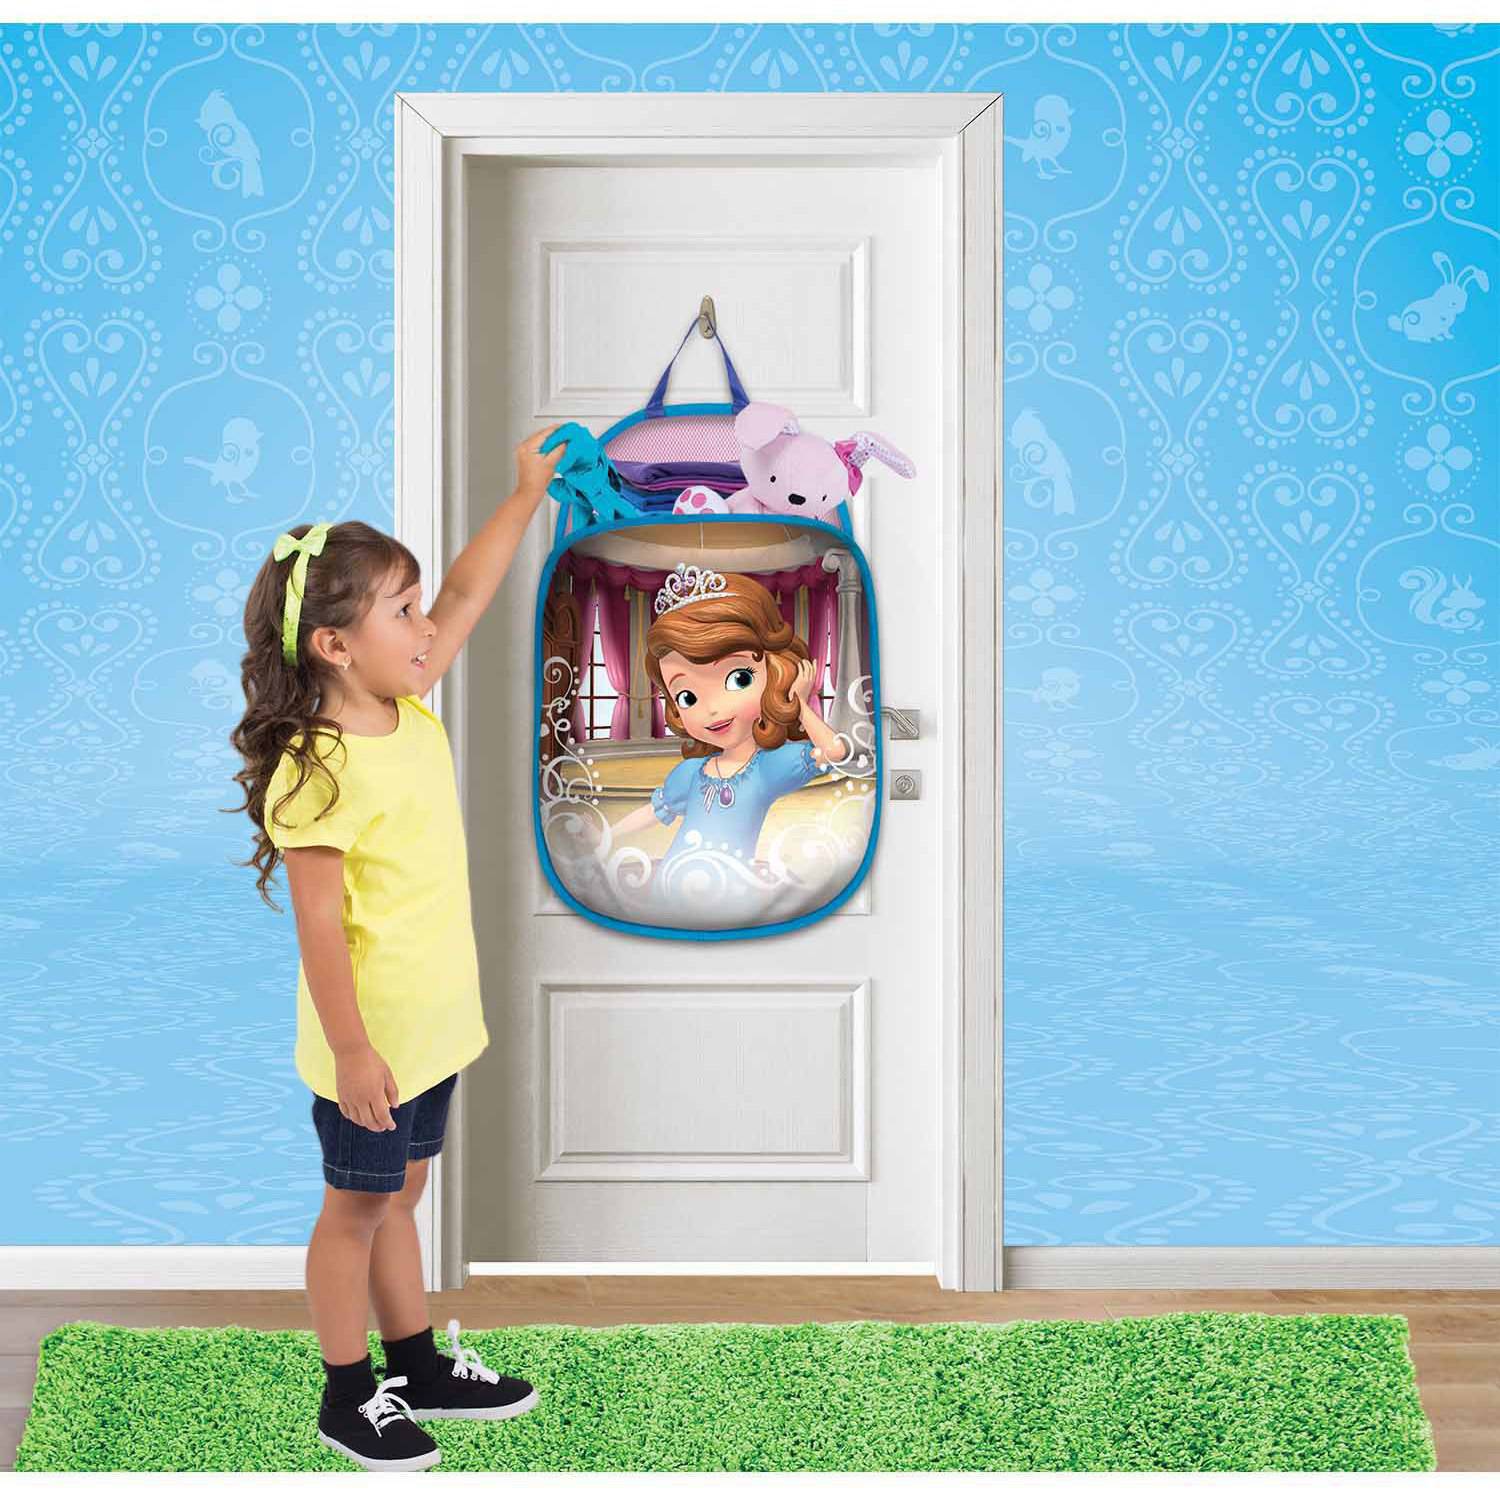 Playhut Disney Sofia the First Pop N Play Tote - image 2 of 2